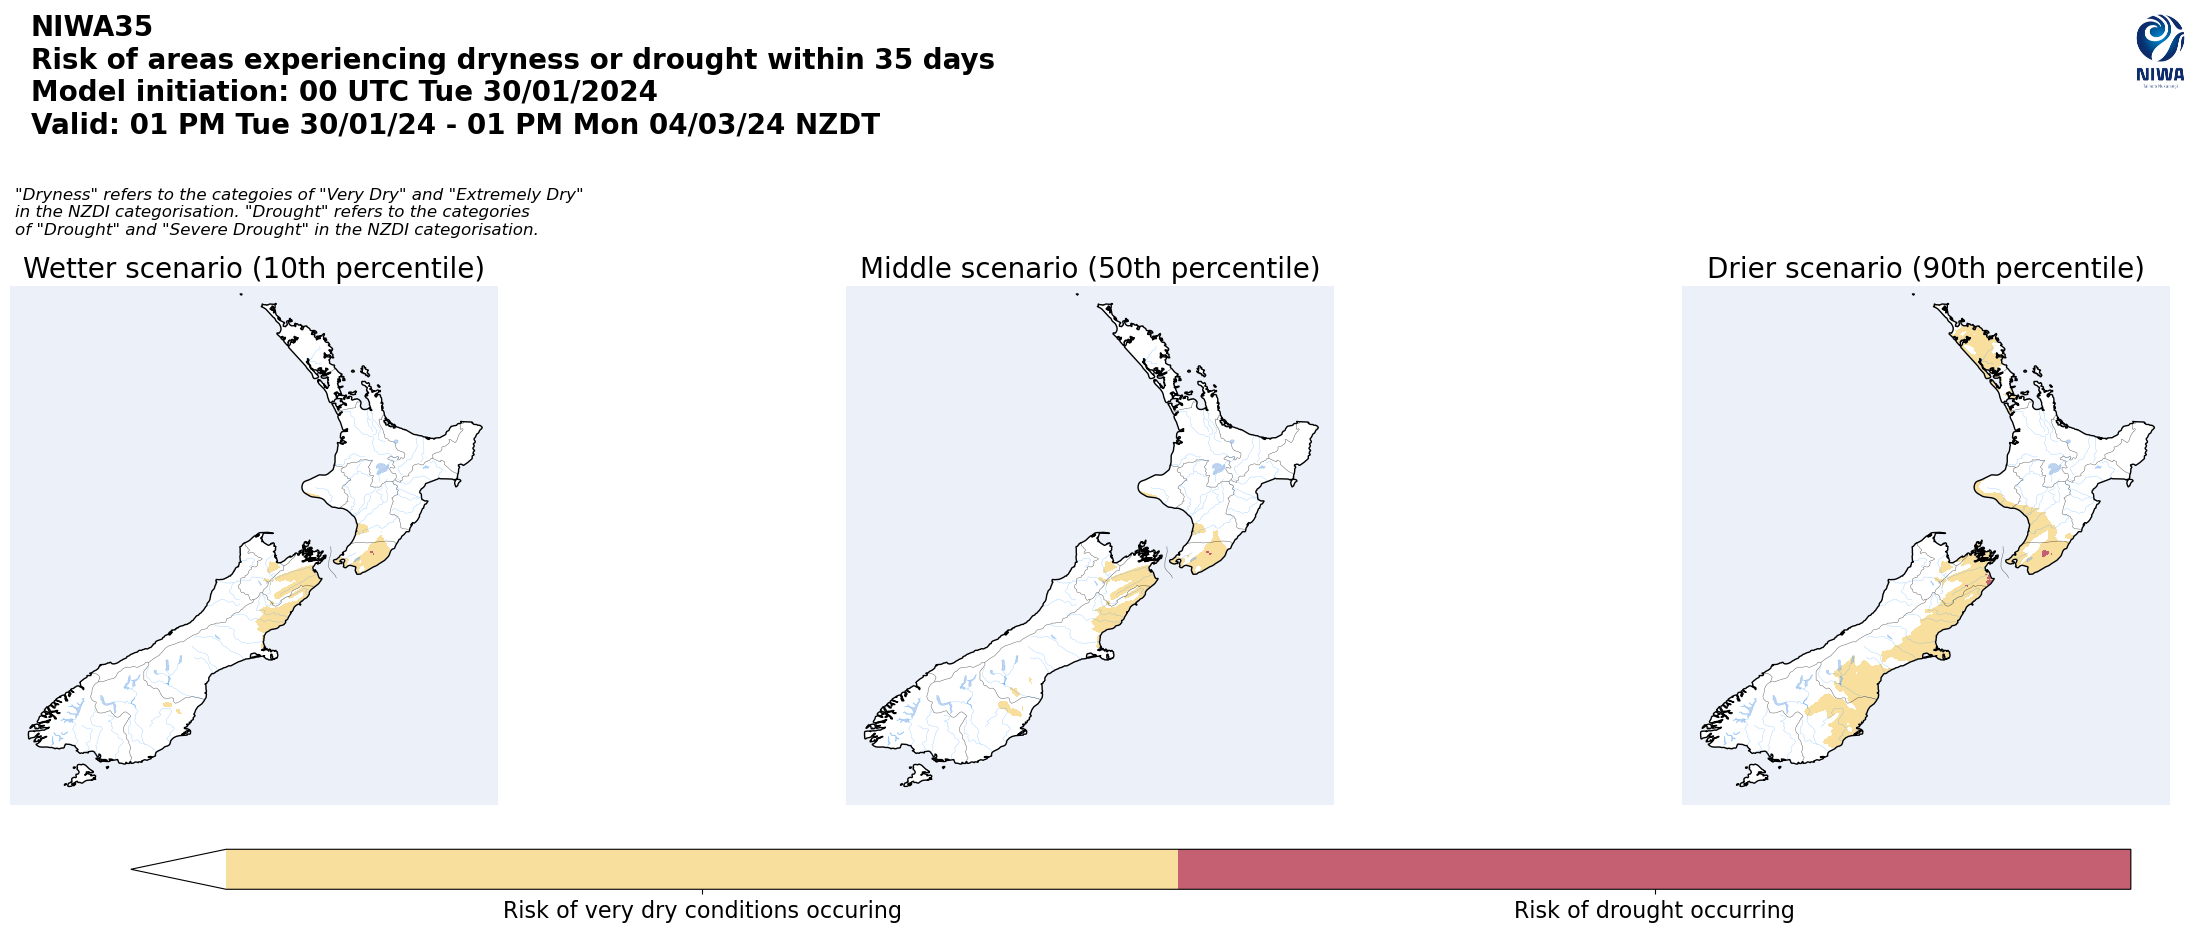 Risk of areas experiencing dryness or drought within 35 days from 30 January 2024